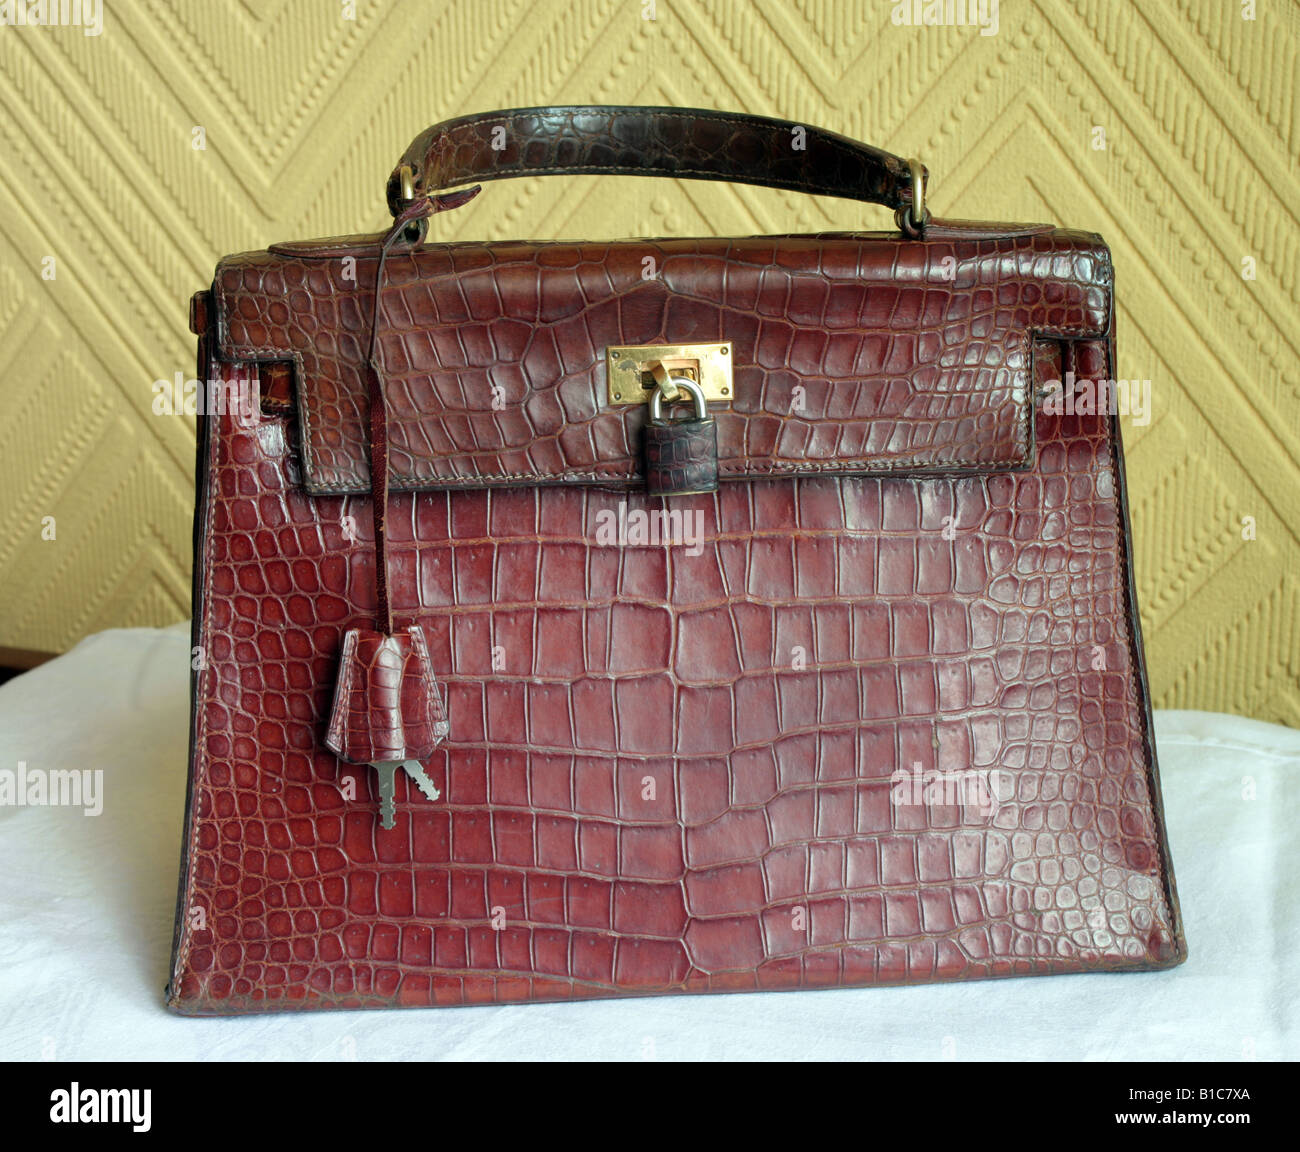 Hermes kelly bag hi-res stock photography and images - Alamy